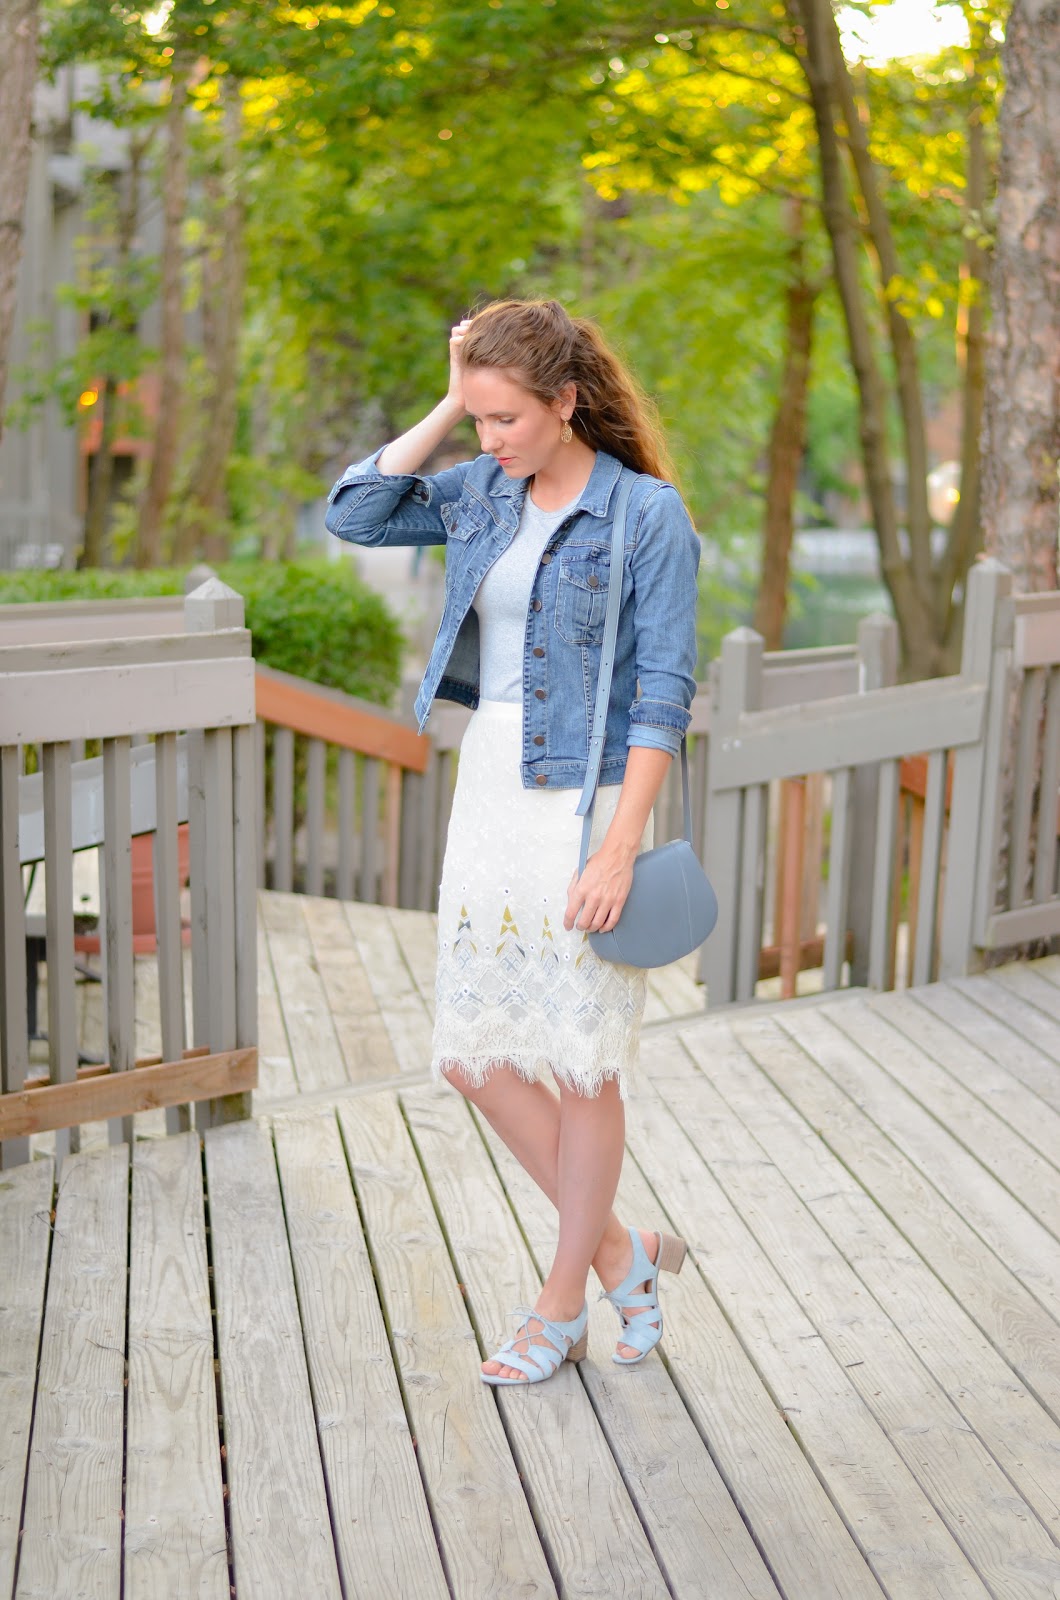 Sincerely Jenna Marie | A St. Louis Life and Style Blog: The Lucky Find ...